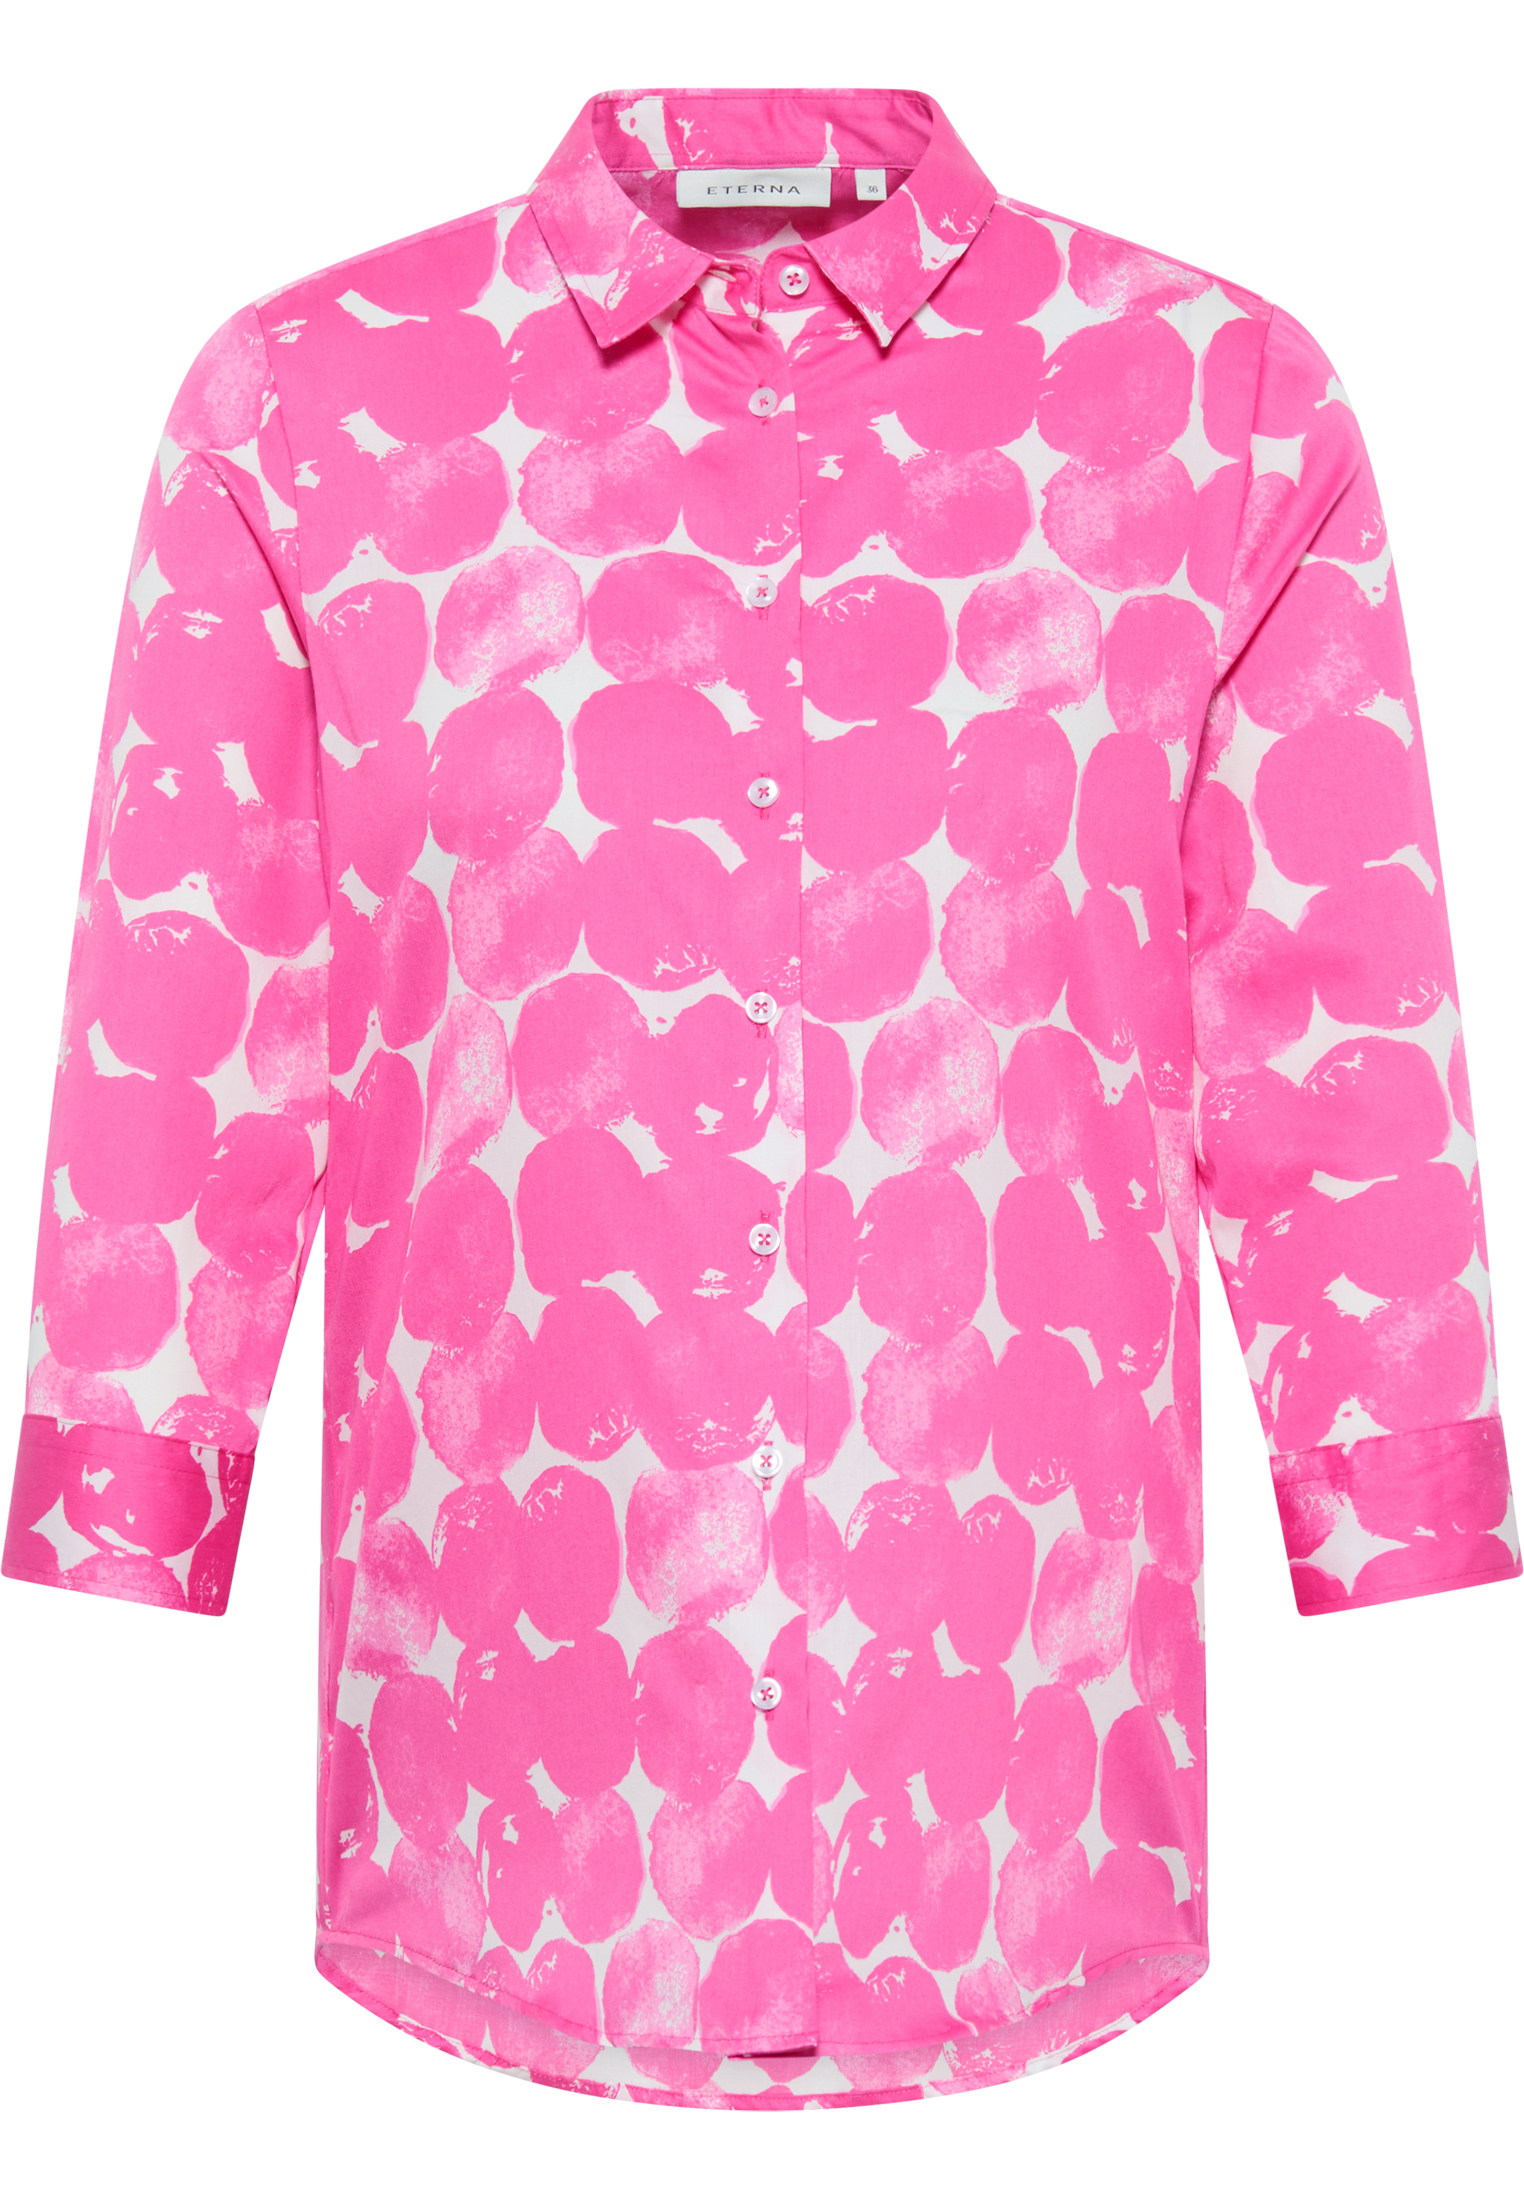 in 50 sleeves | pink shirt-blouse | | pink | 2BL03949-15-21-50-3/4 3/4 printed